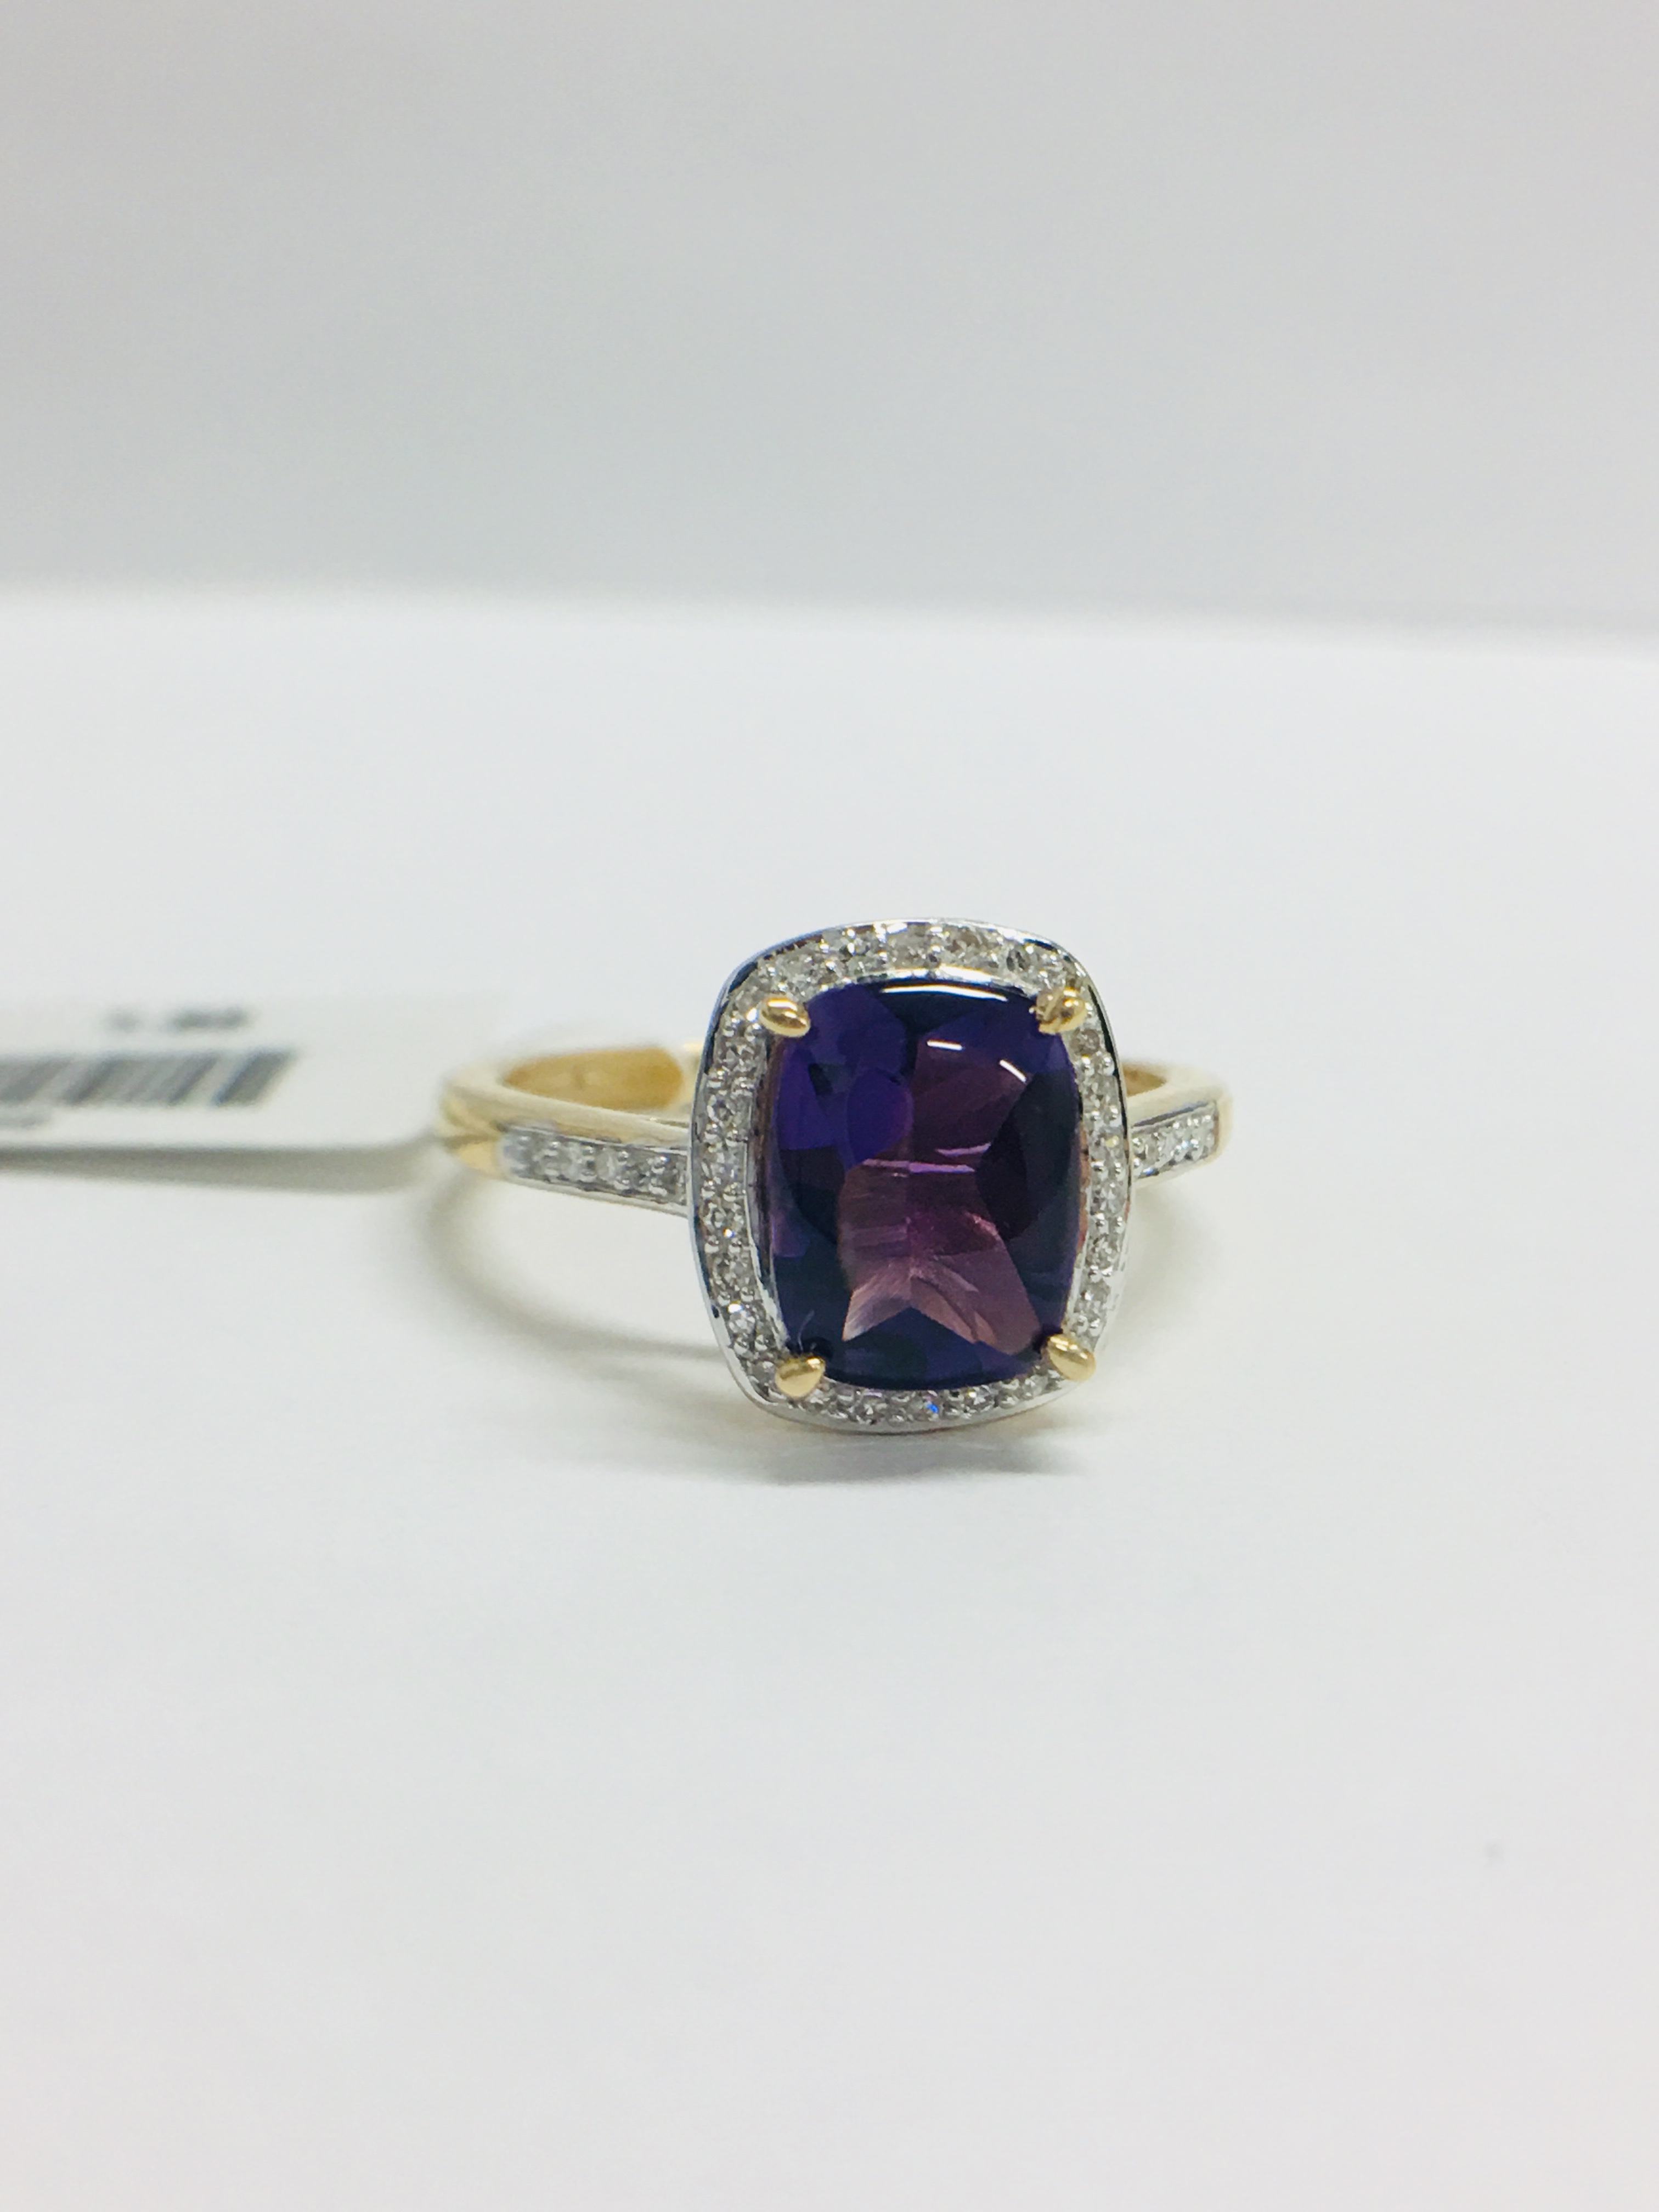 9ct yellow gold Amethyst and diamond ring - Image 10 of 11